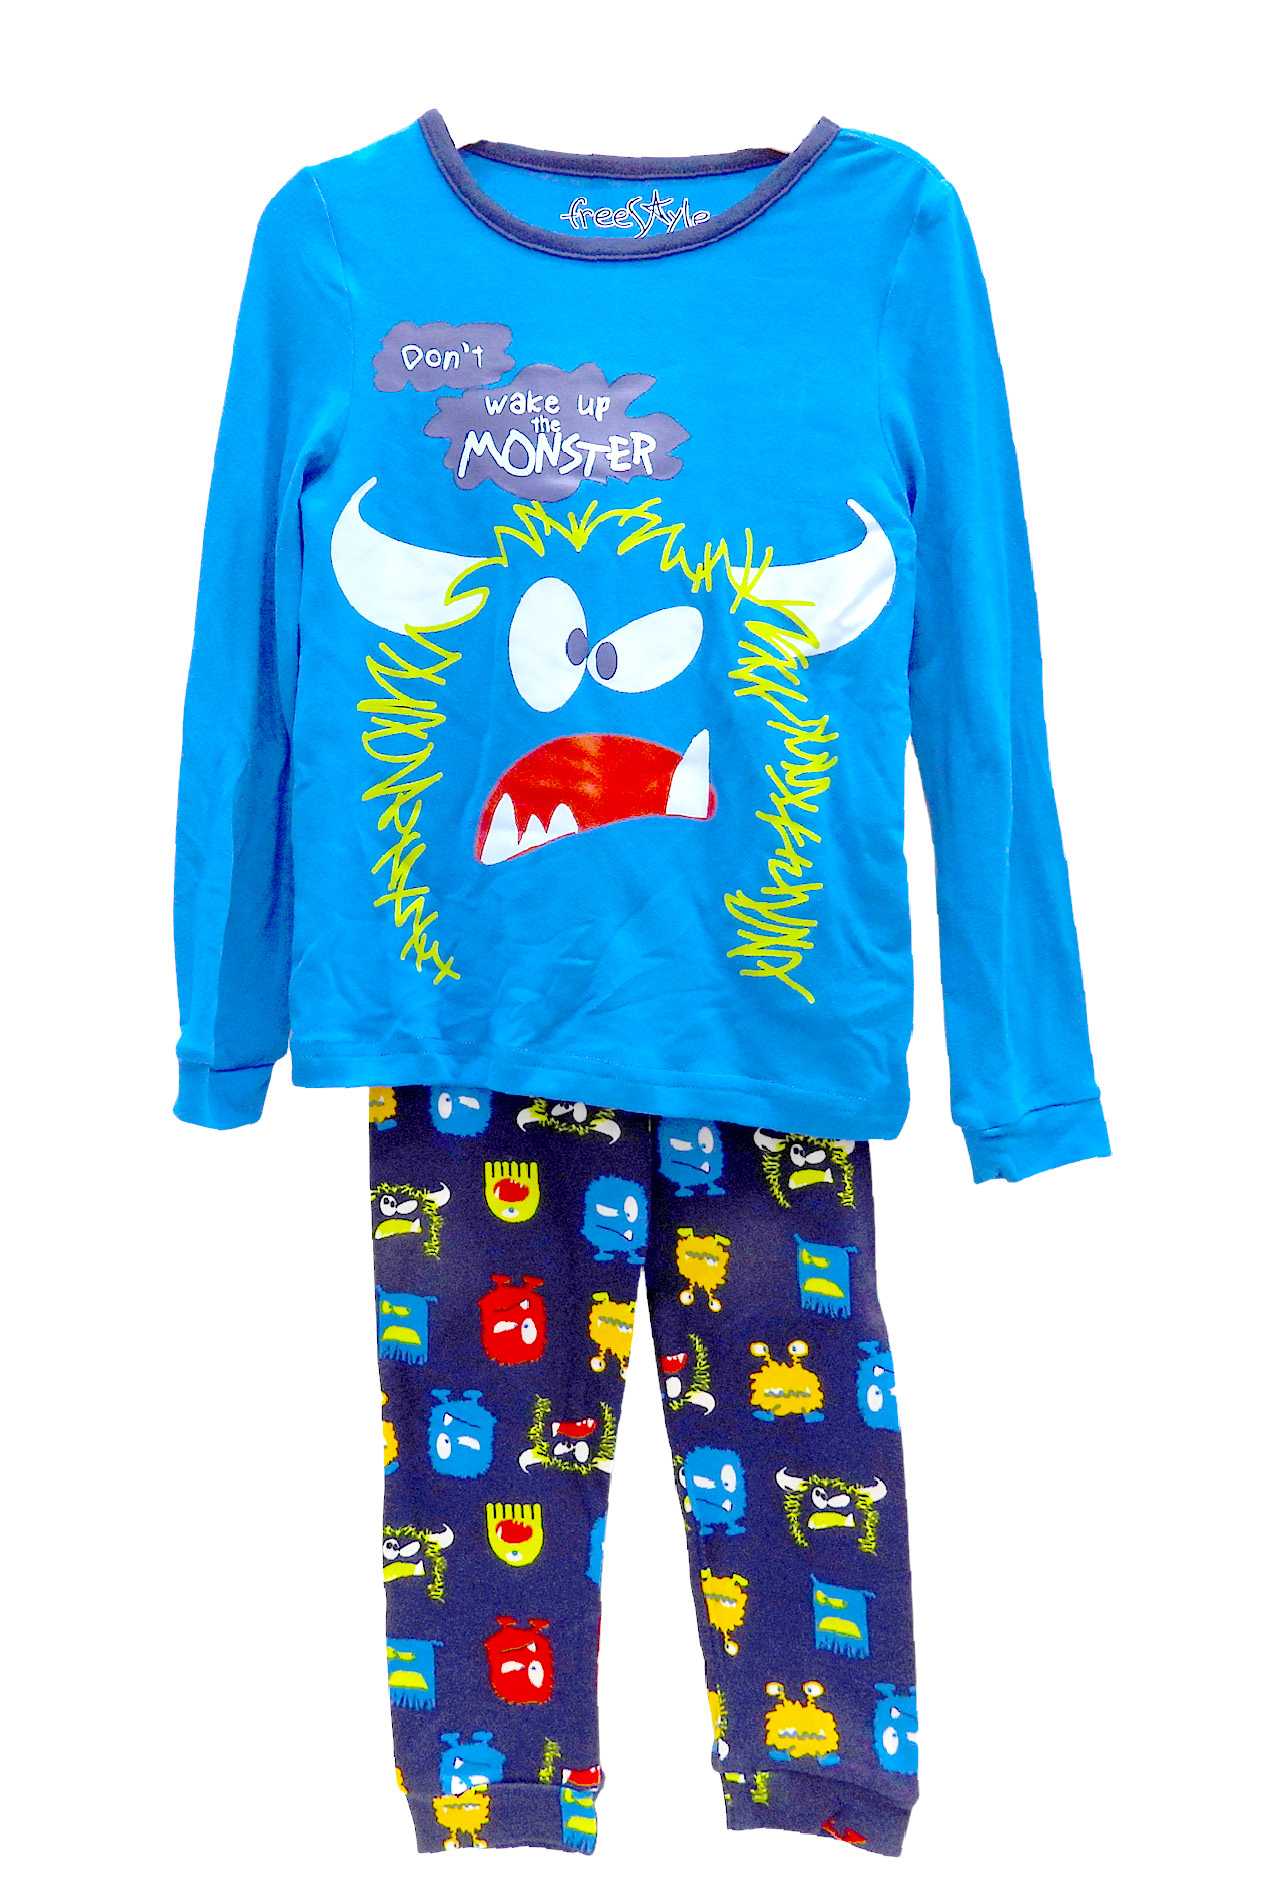 Monster In The Morning Pajama